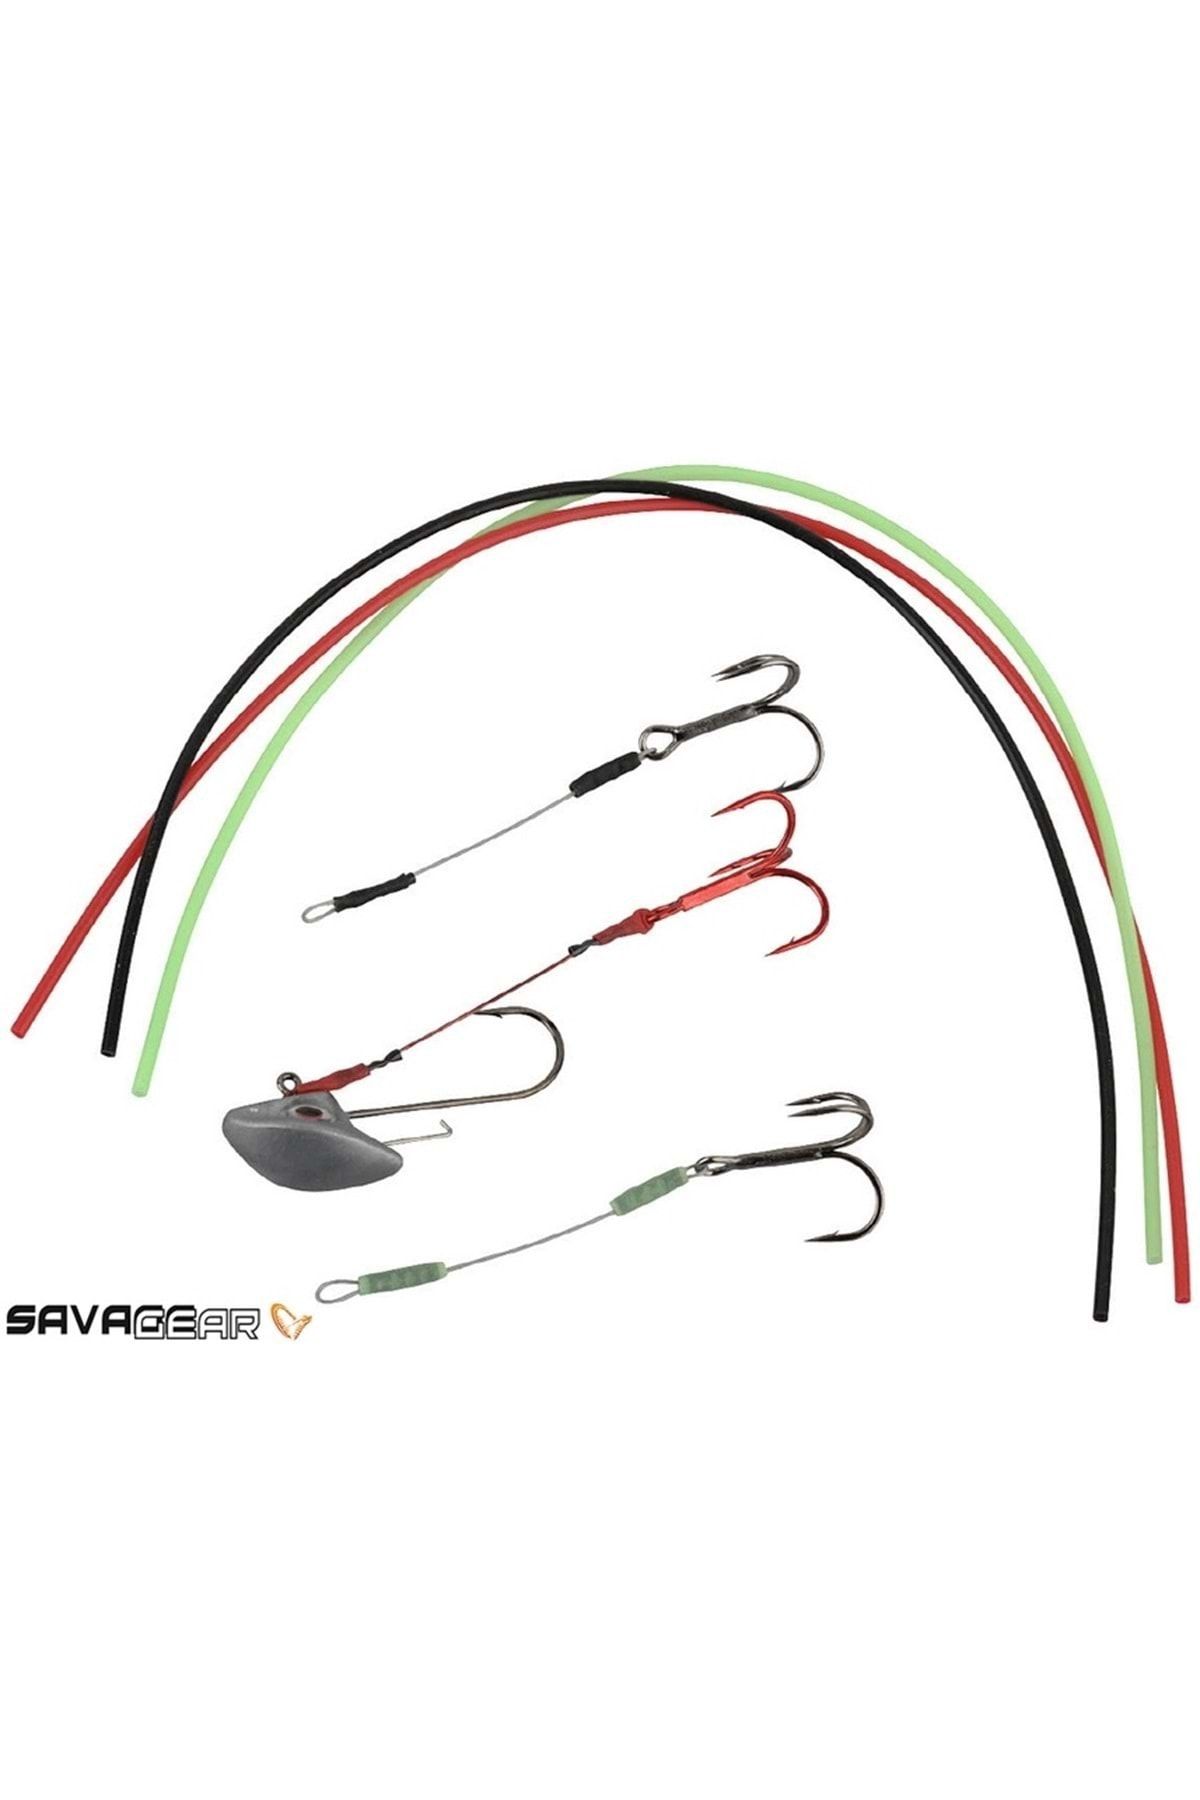 Savage Gear Rig Finesse Silicone Tube. Red. Black. Glow 1.4 Mm 3x30 Cm